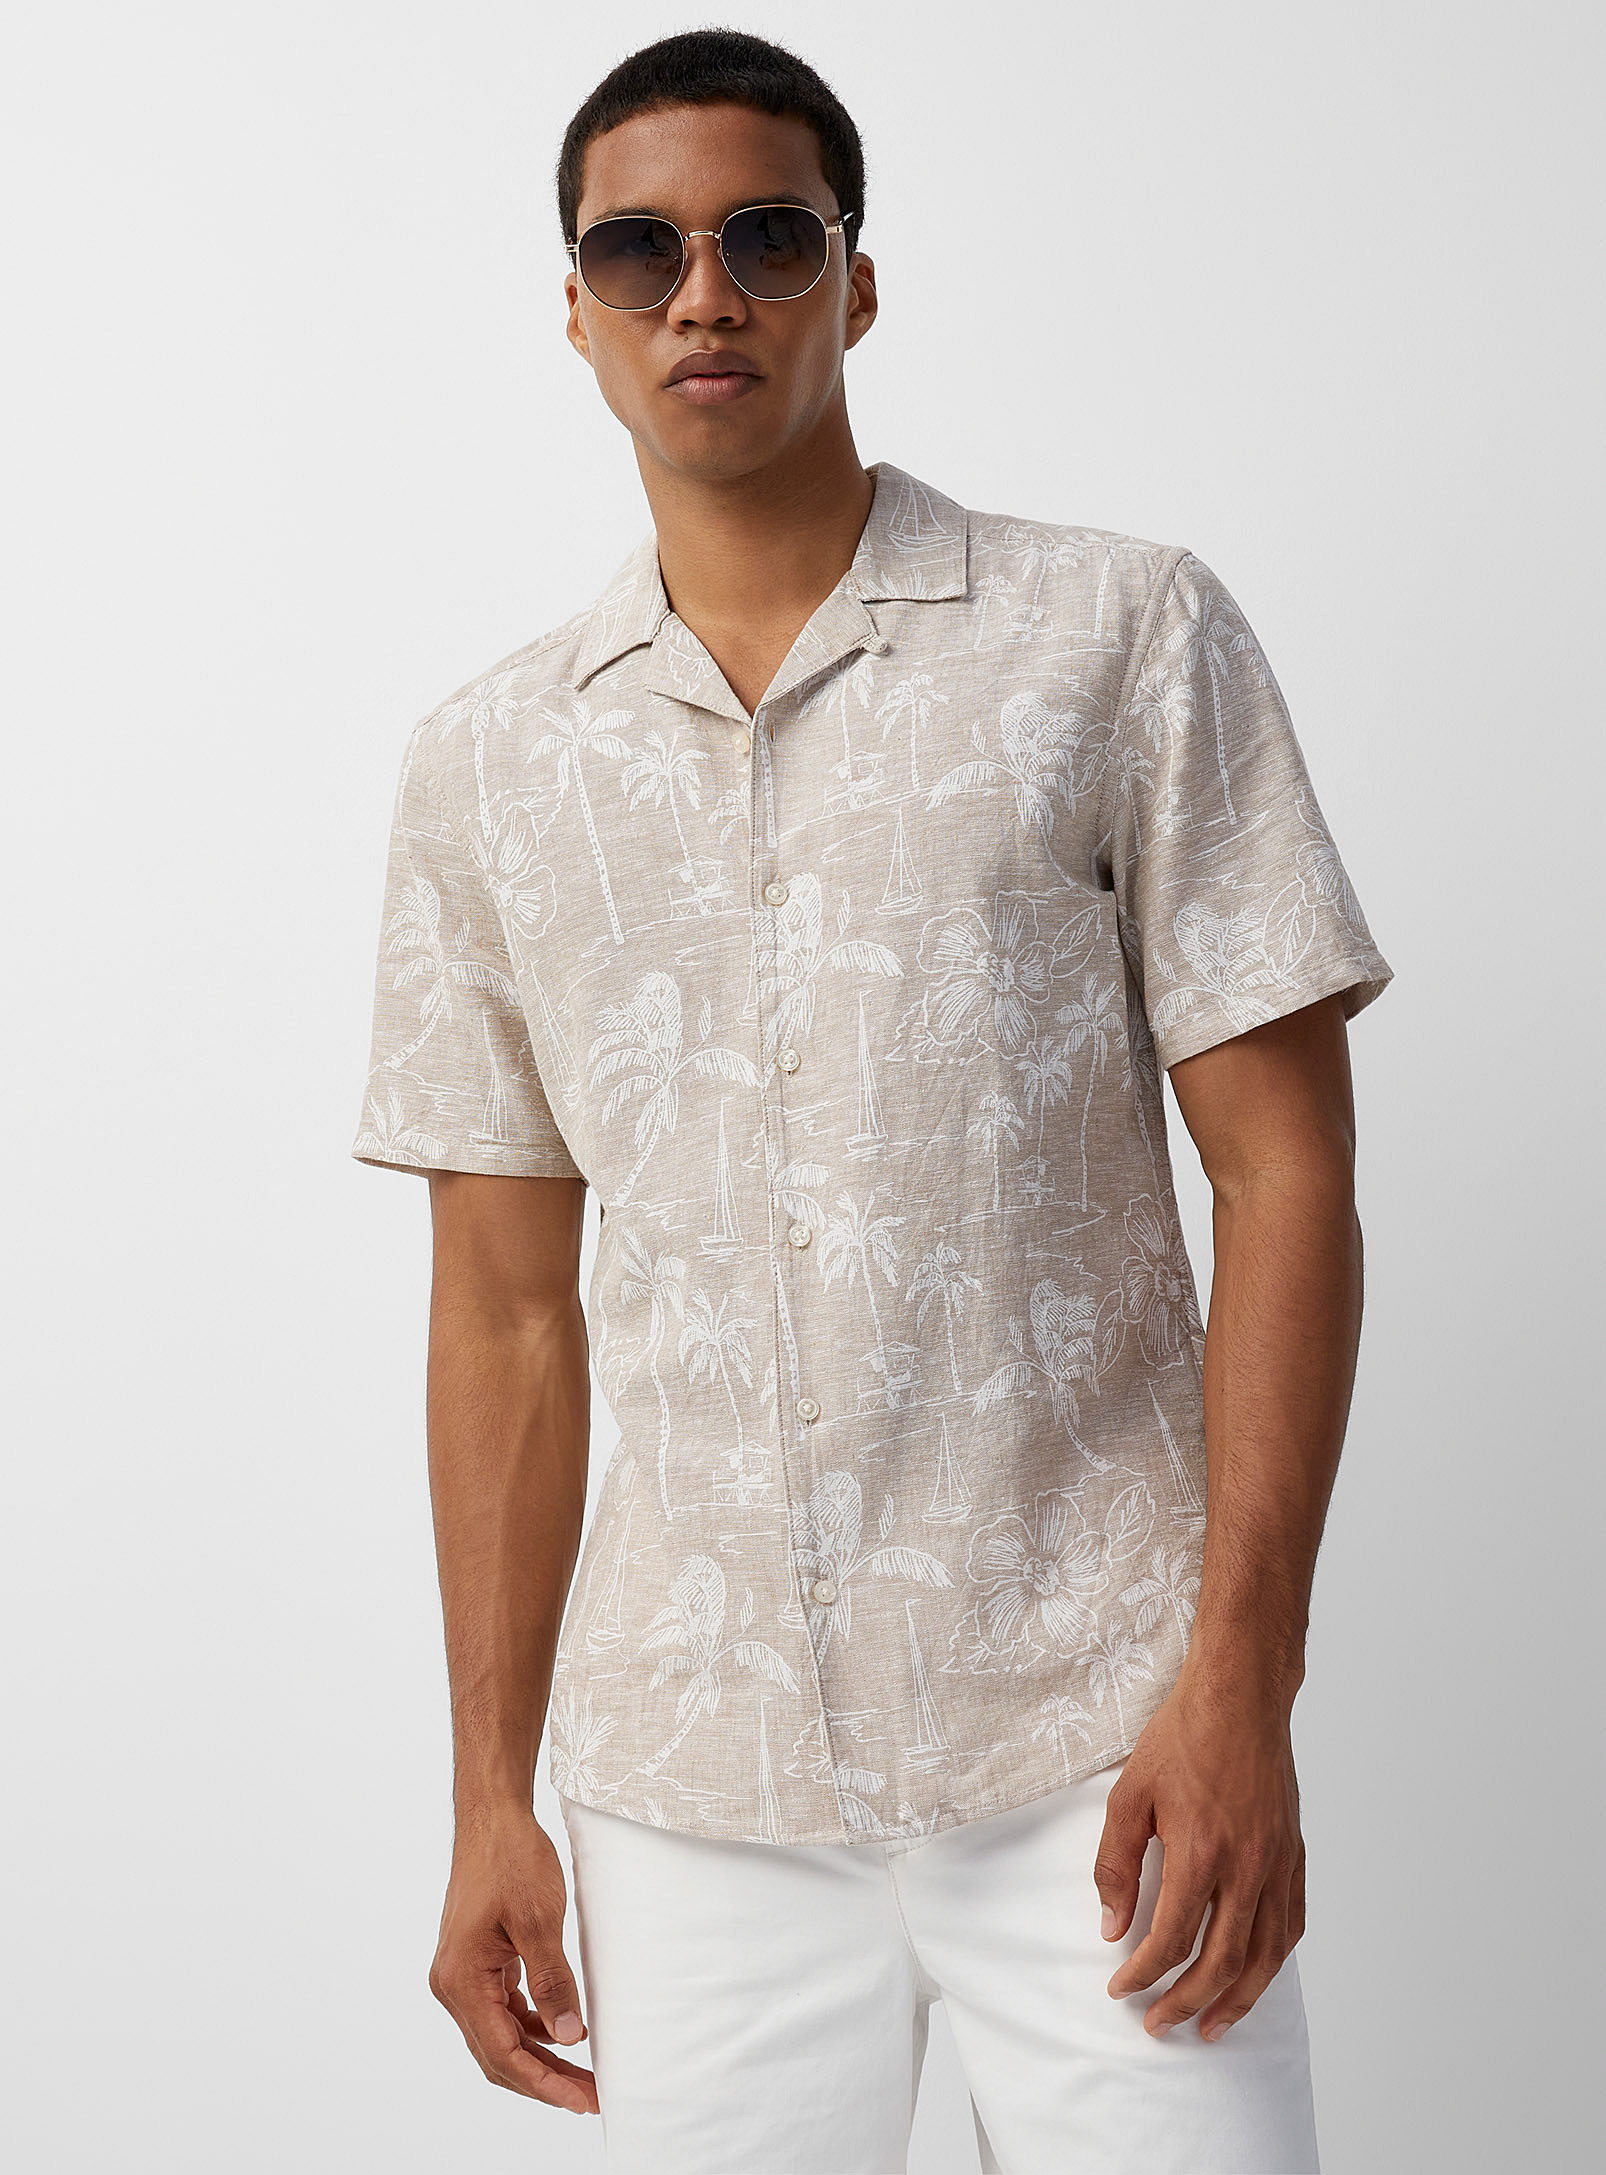 Only & Sons Tropical Island Print Chambray Shirt In Ivory/cream Beige